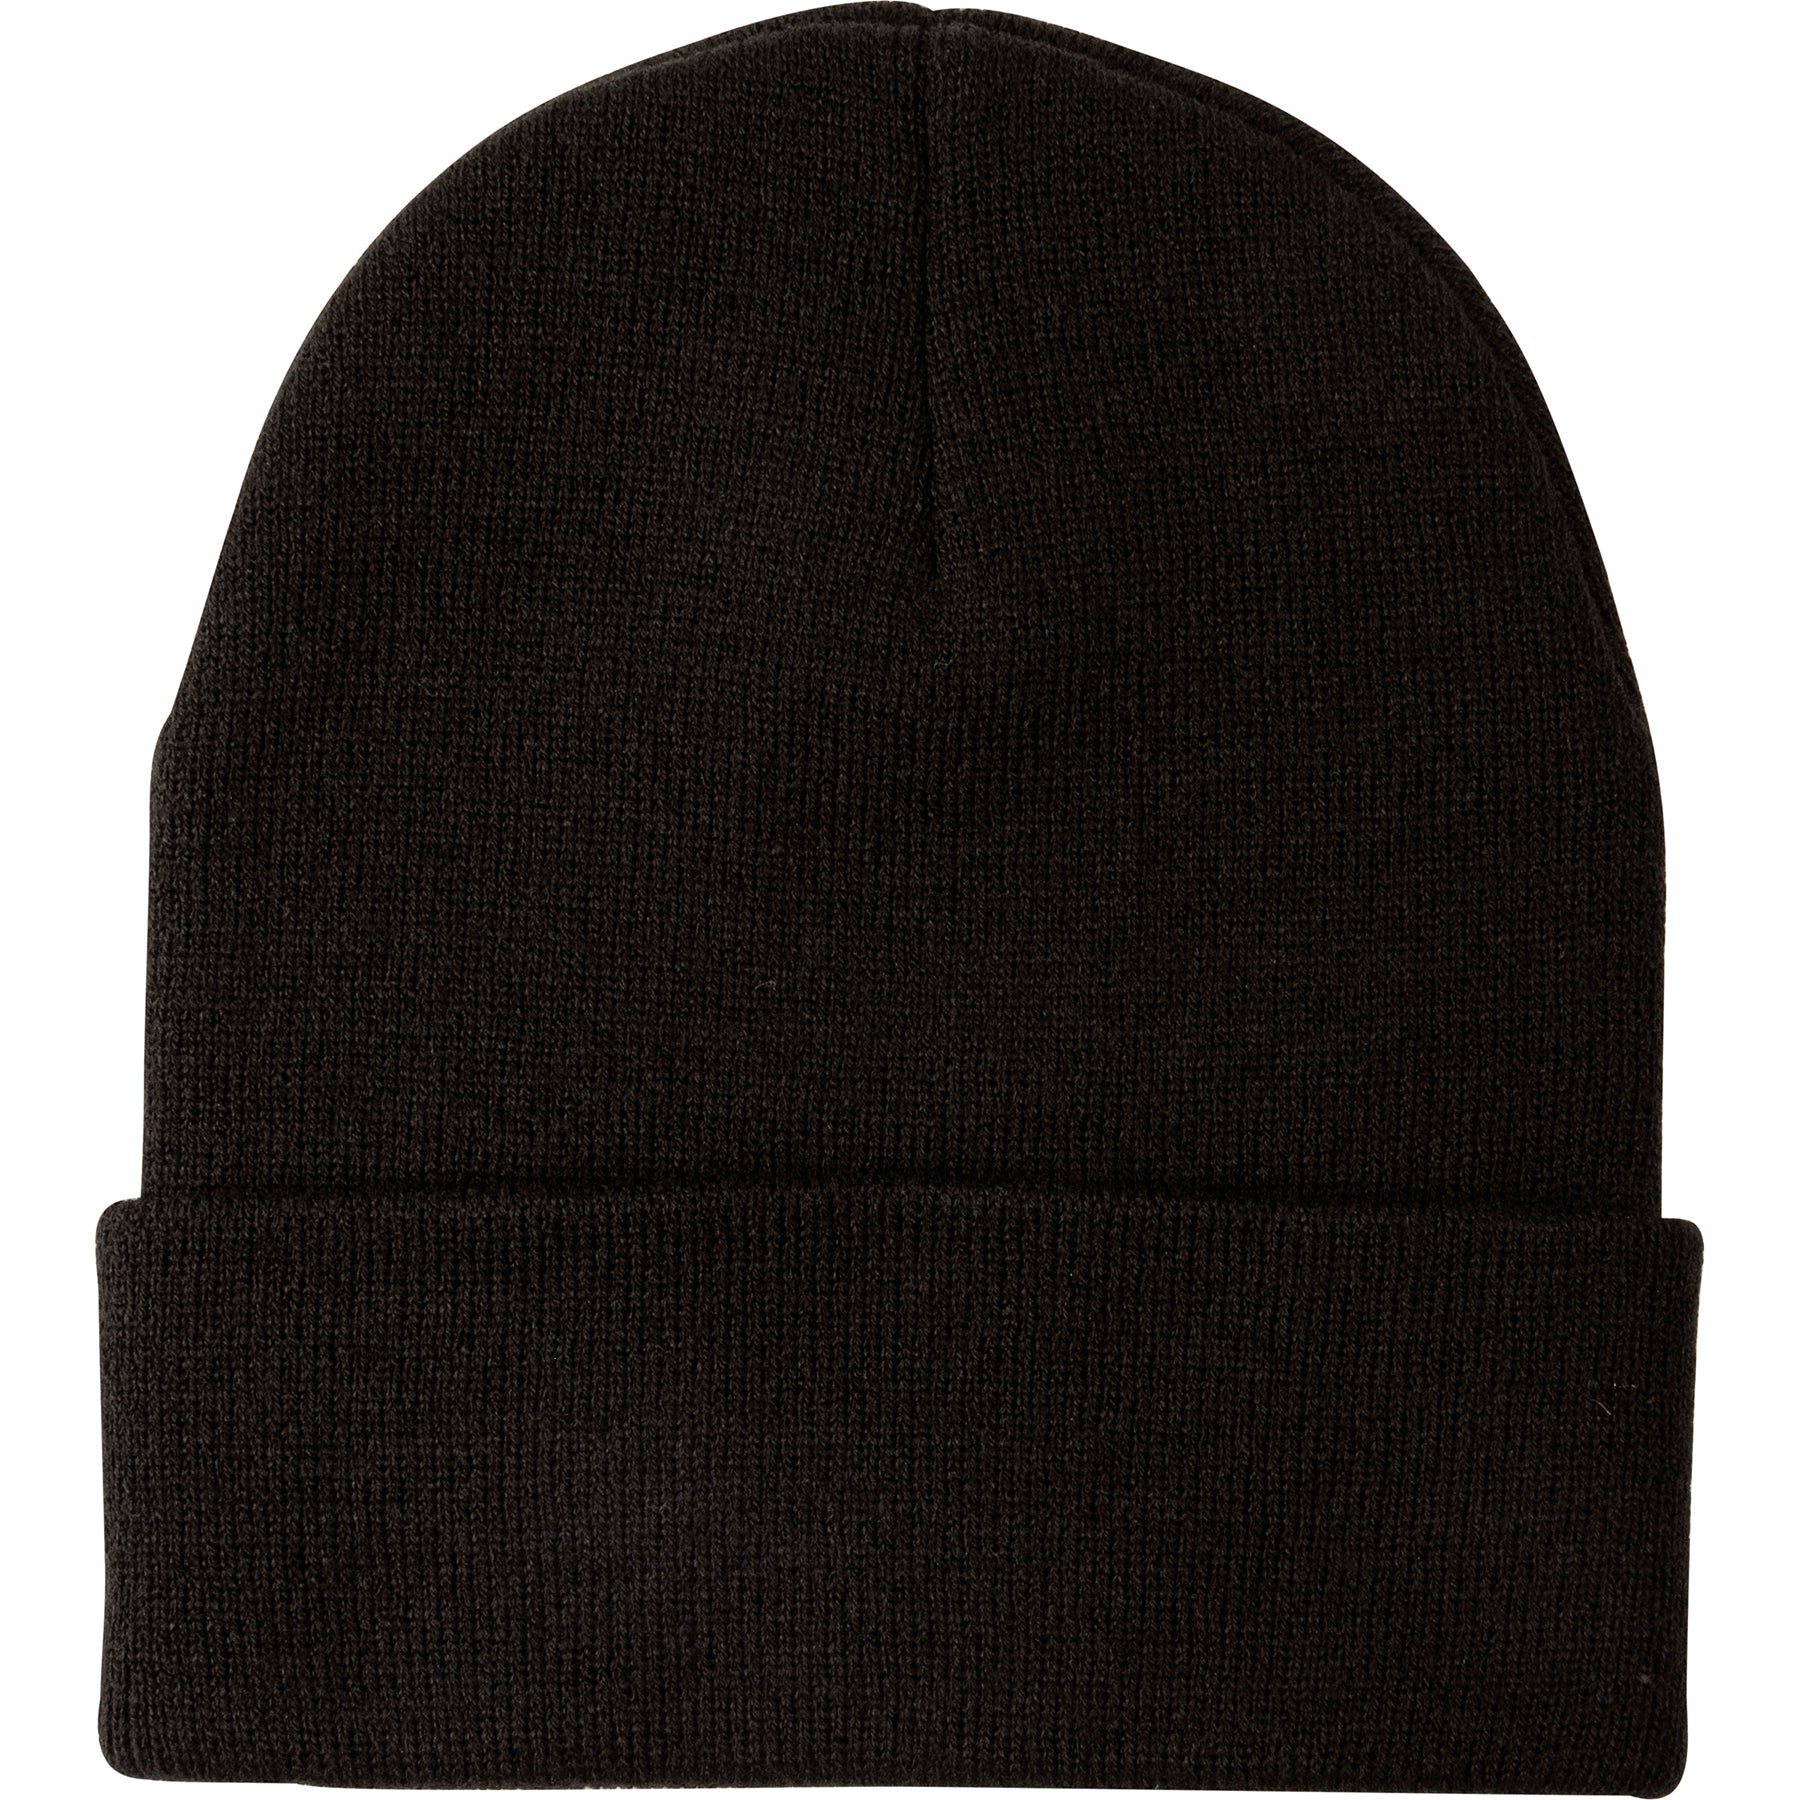 Say No To Plans Black Beanie | Embroidered Unisex Winter Hat